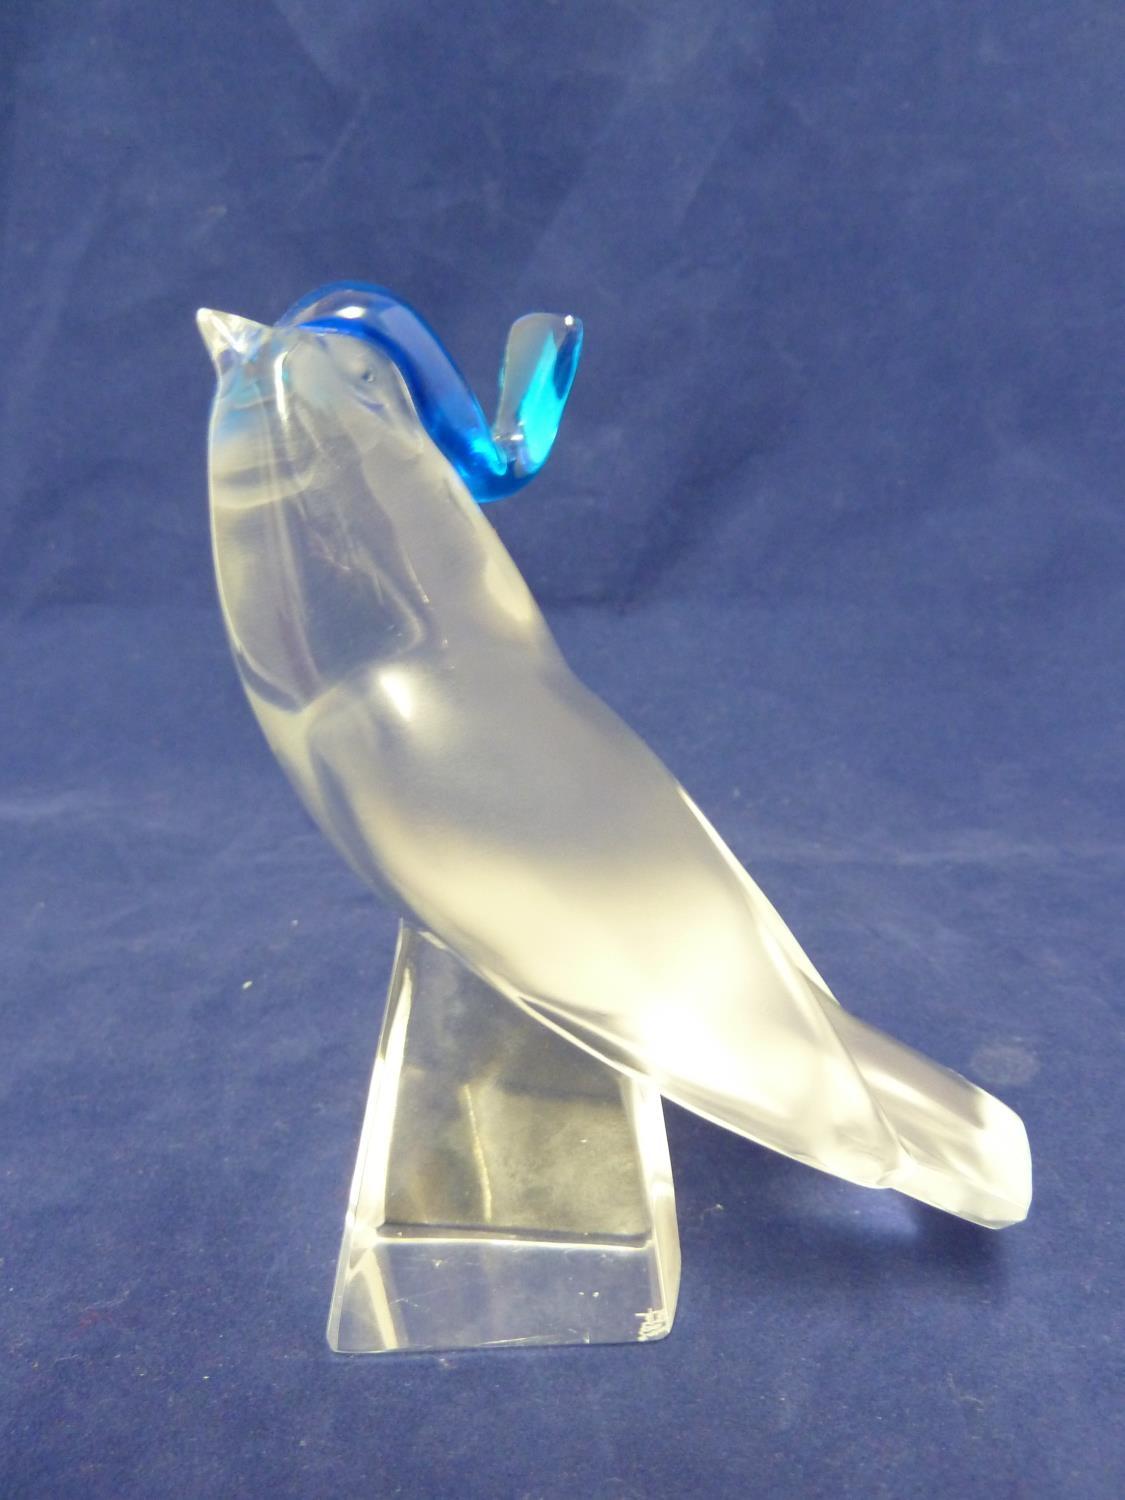 Lalique - a Pimlico glass bird figure, the frosted glass swallow type bird, wearing a blue glass hat